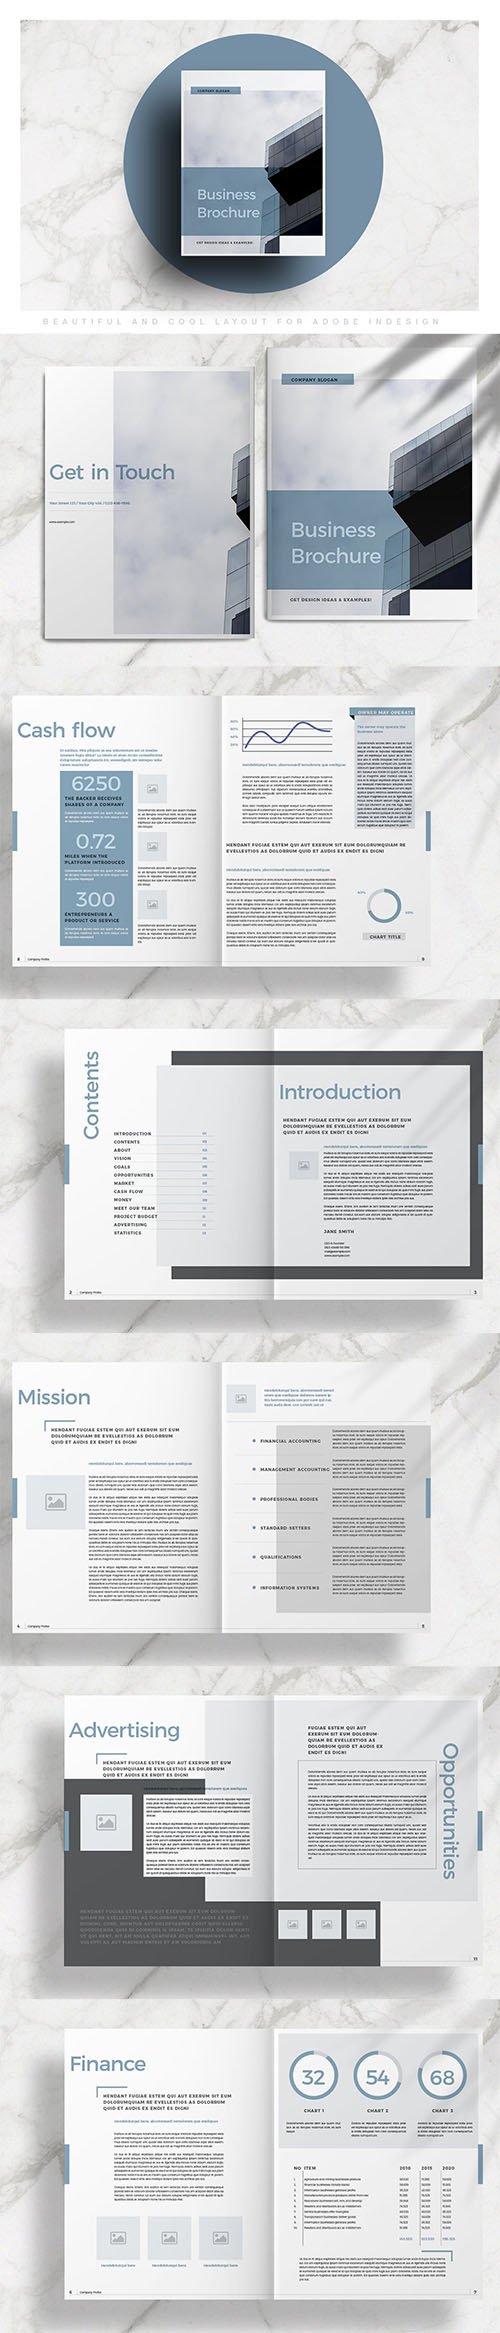 Business Brochure Layout INDD